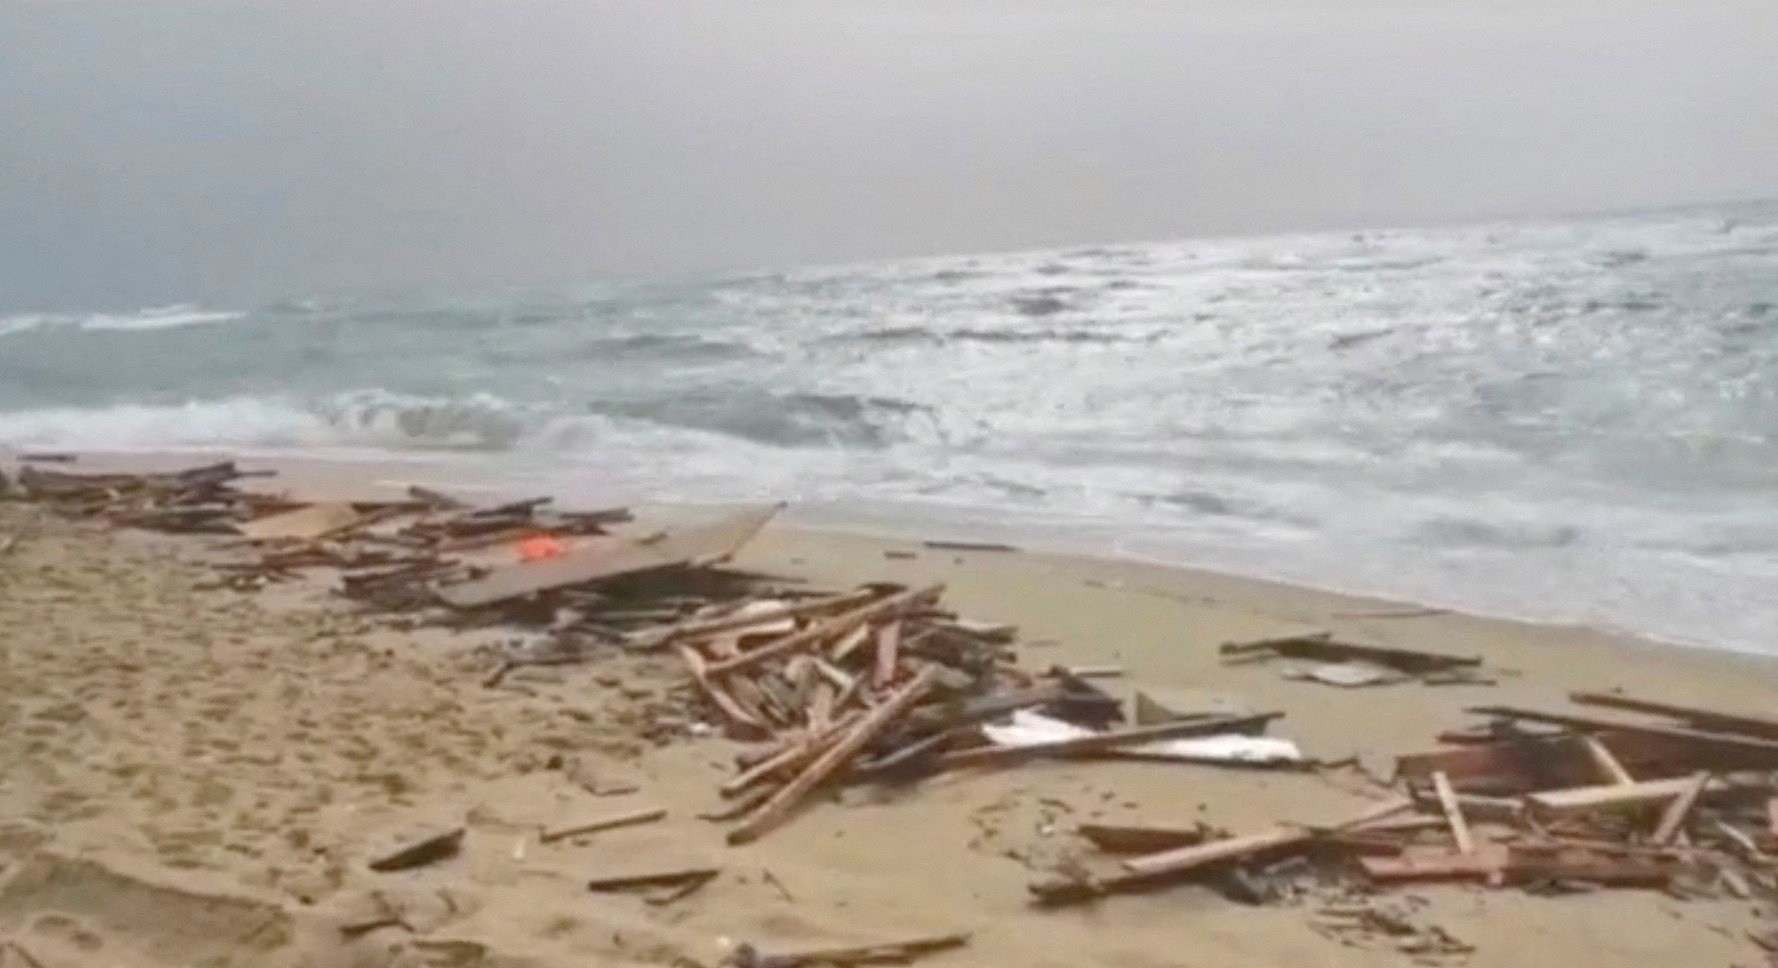 A screengrab taken from a video shows the beach where bodies of suspected to be refugees were found after a shipwreck, in Cutro, the eastern coast of Italy's Calabria region, Italy, February 26, 2023. Photo: Reuters